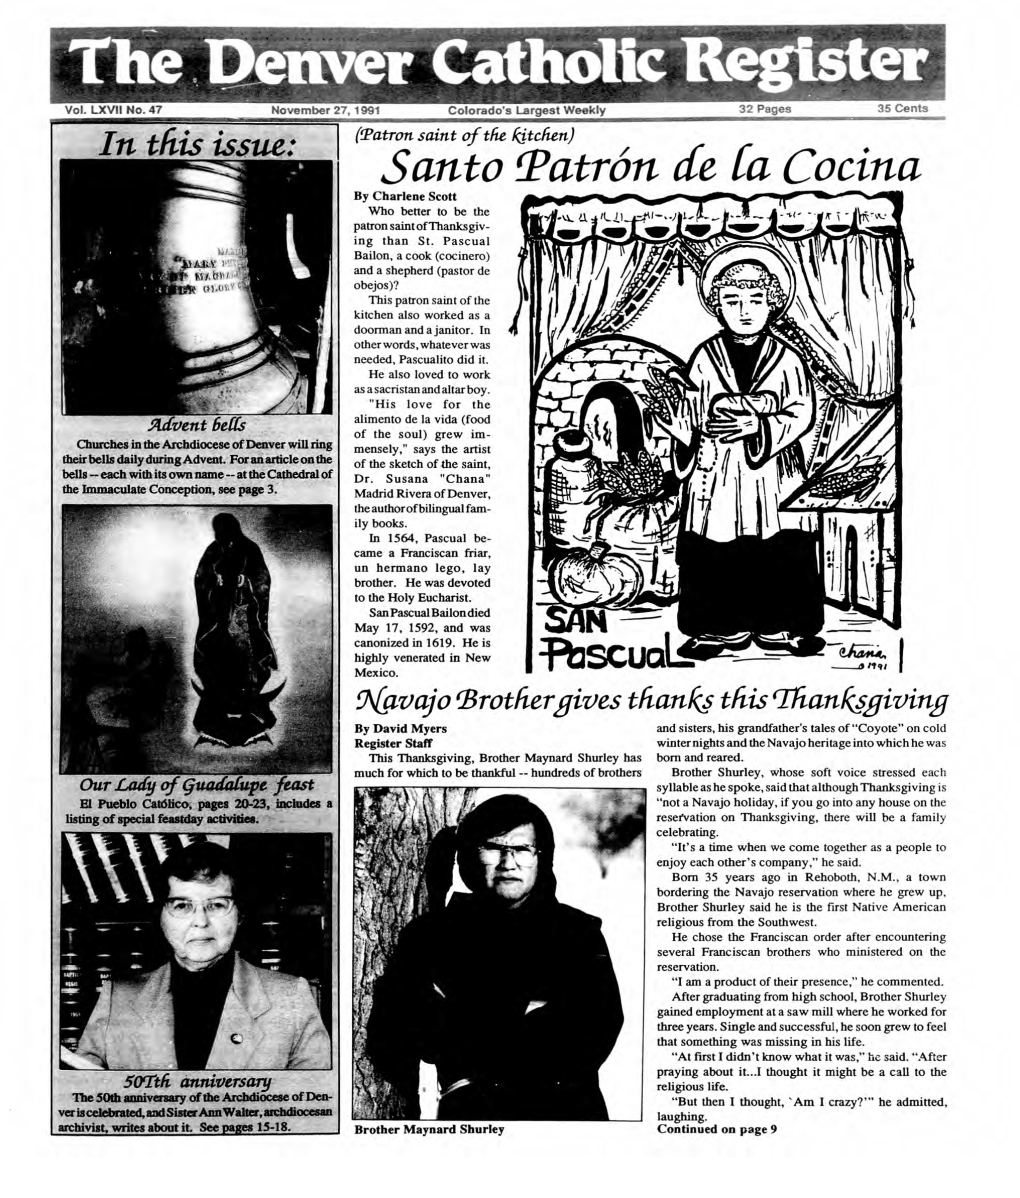 Santo (Patron De Ca Cocina by Charlene Scott Who Better to Be the Patron Saint of Thanks Giv­ Ing Than St